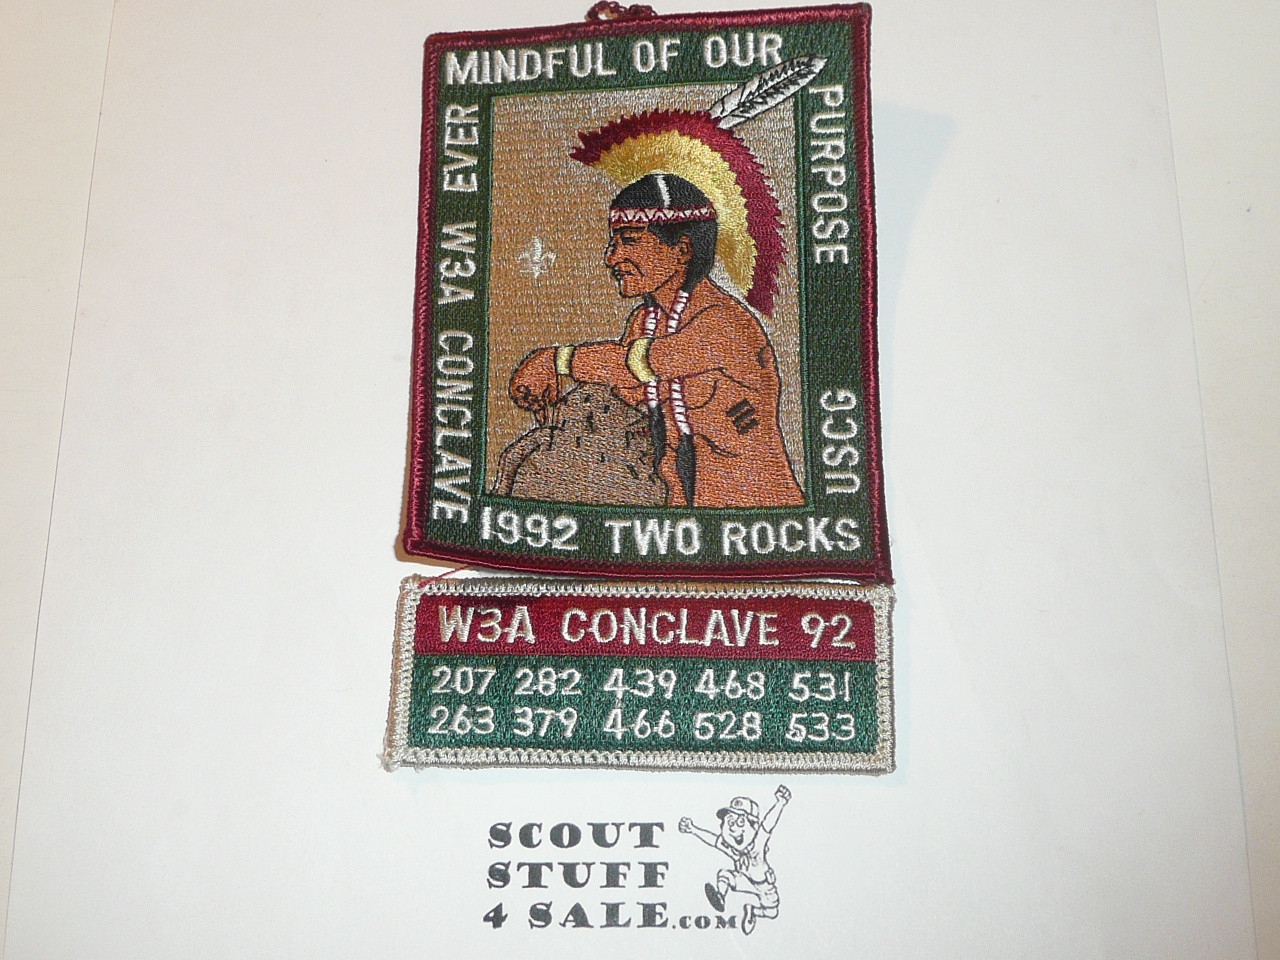 Section W3A 1992 O.A. Conclave Patch with Participant Segment- Scout